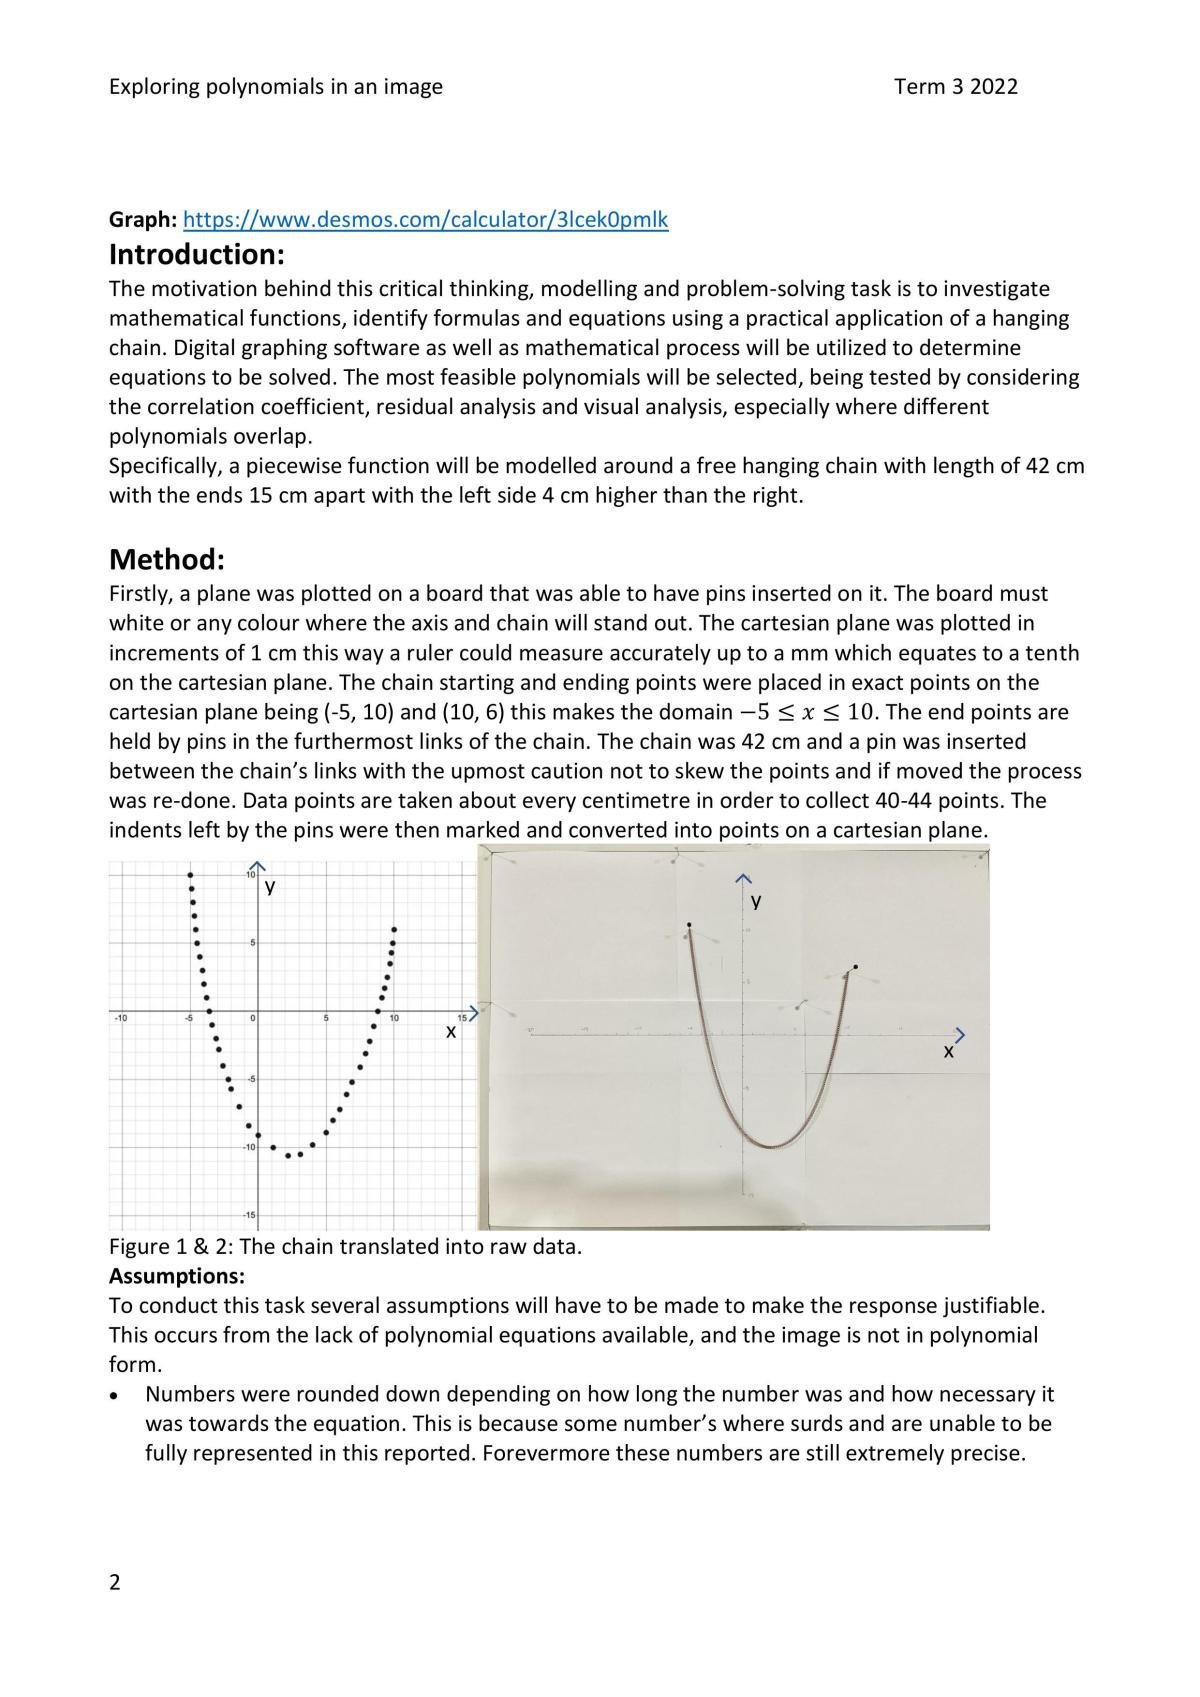 A Mathe Methods PSMT on how gravity affects a chain to make a catenary curve and how lines can be modeled to the curve. - Page 3